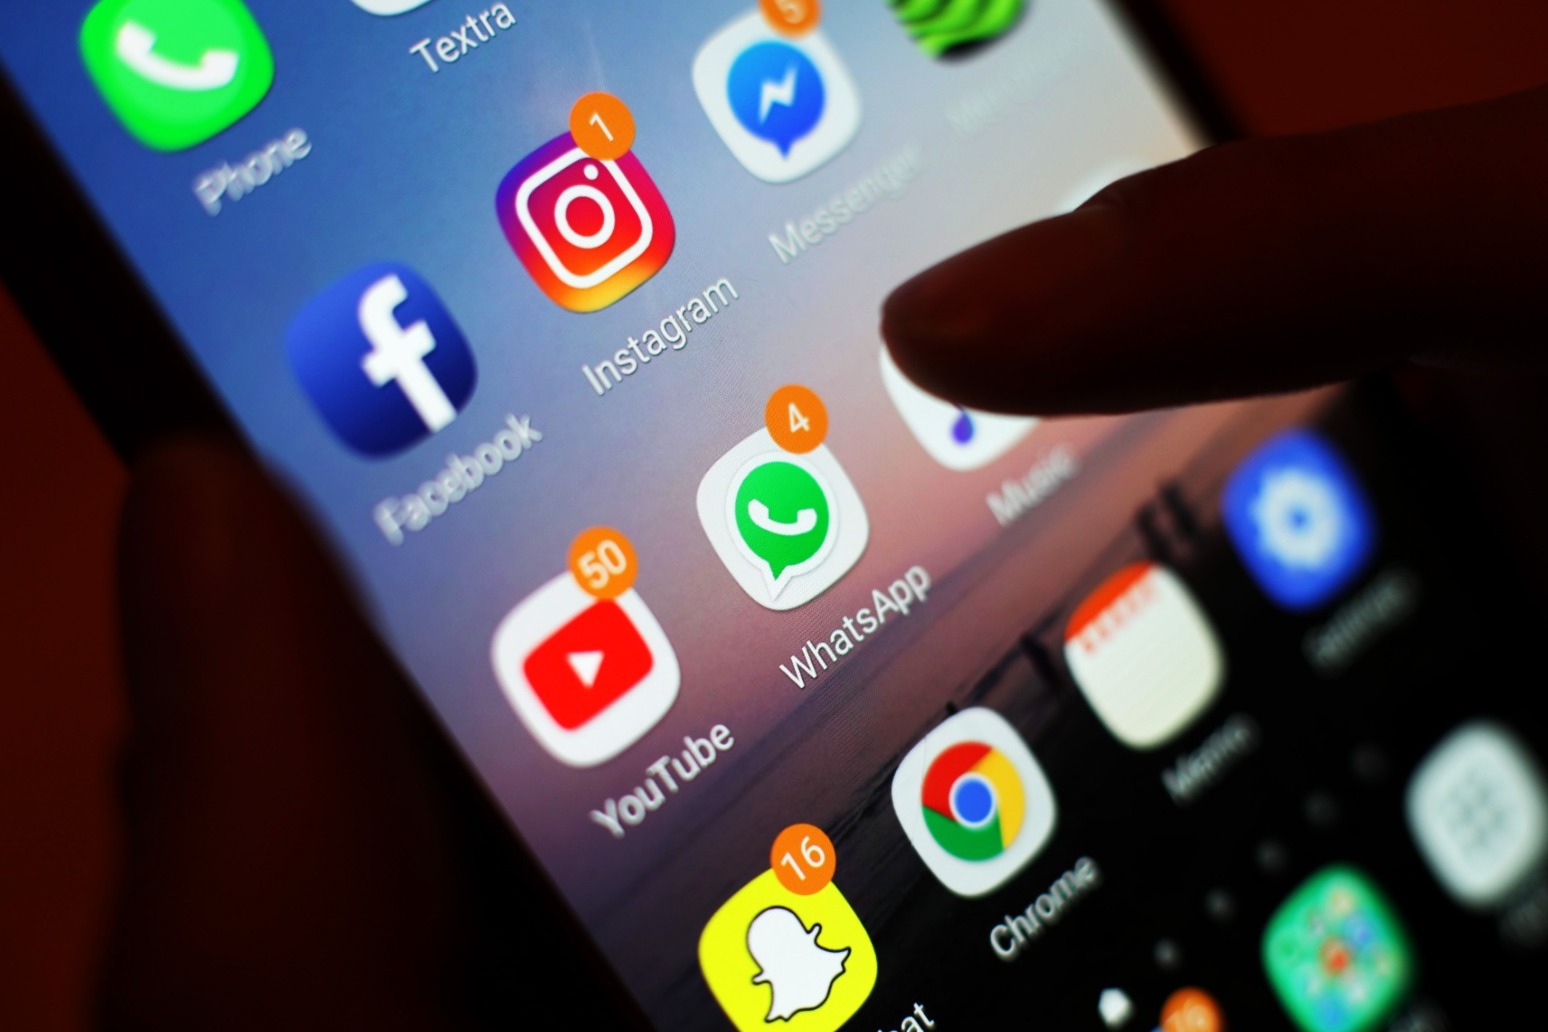 Children turning to social media for news, Ofcom report finds 